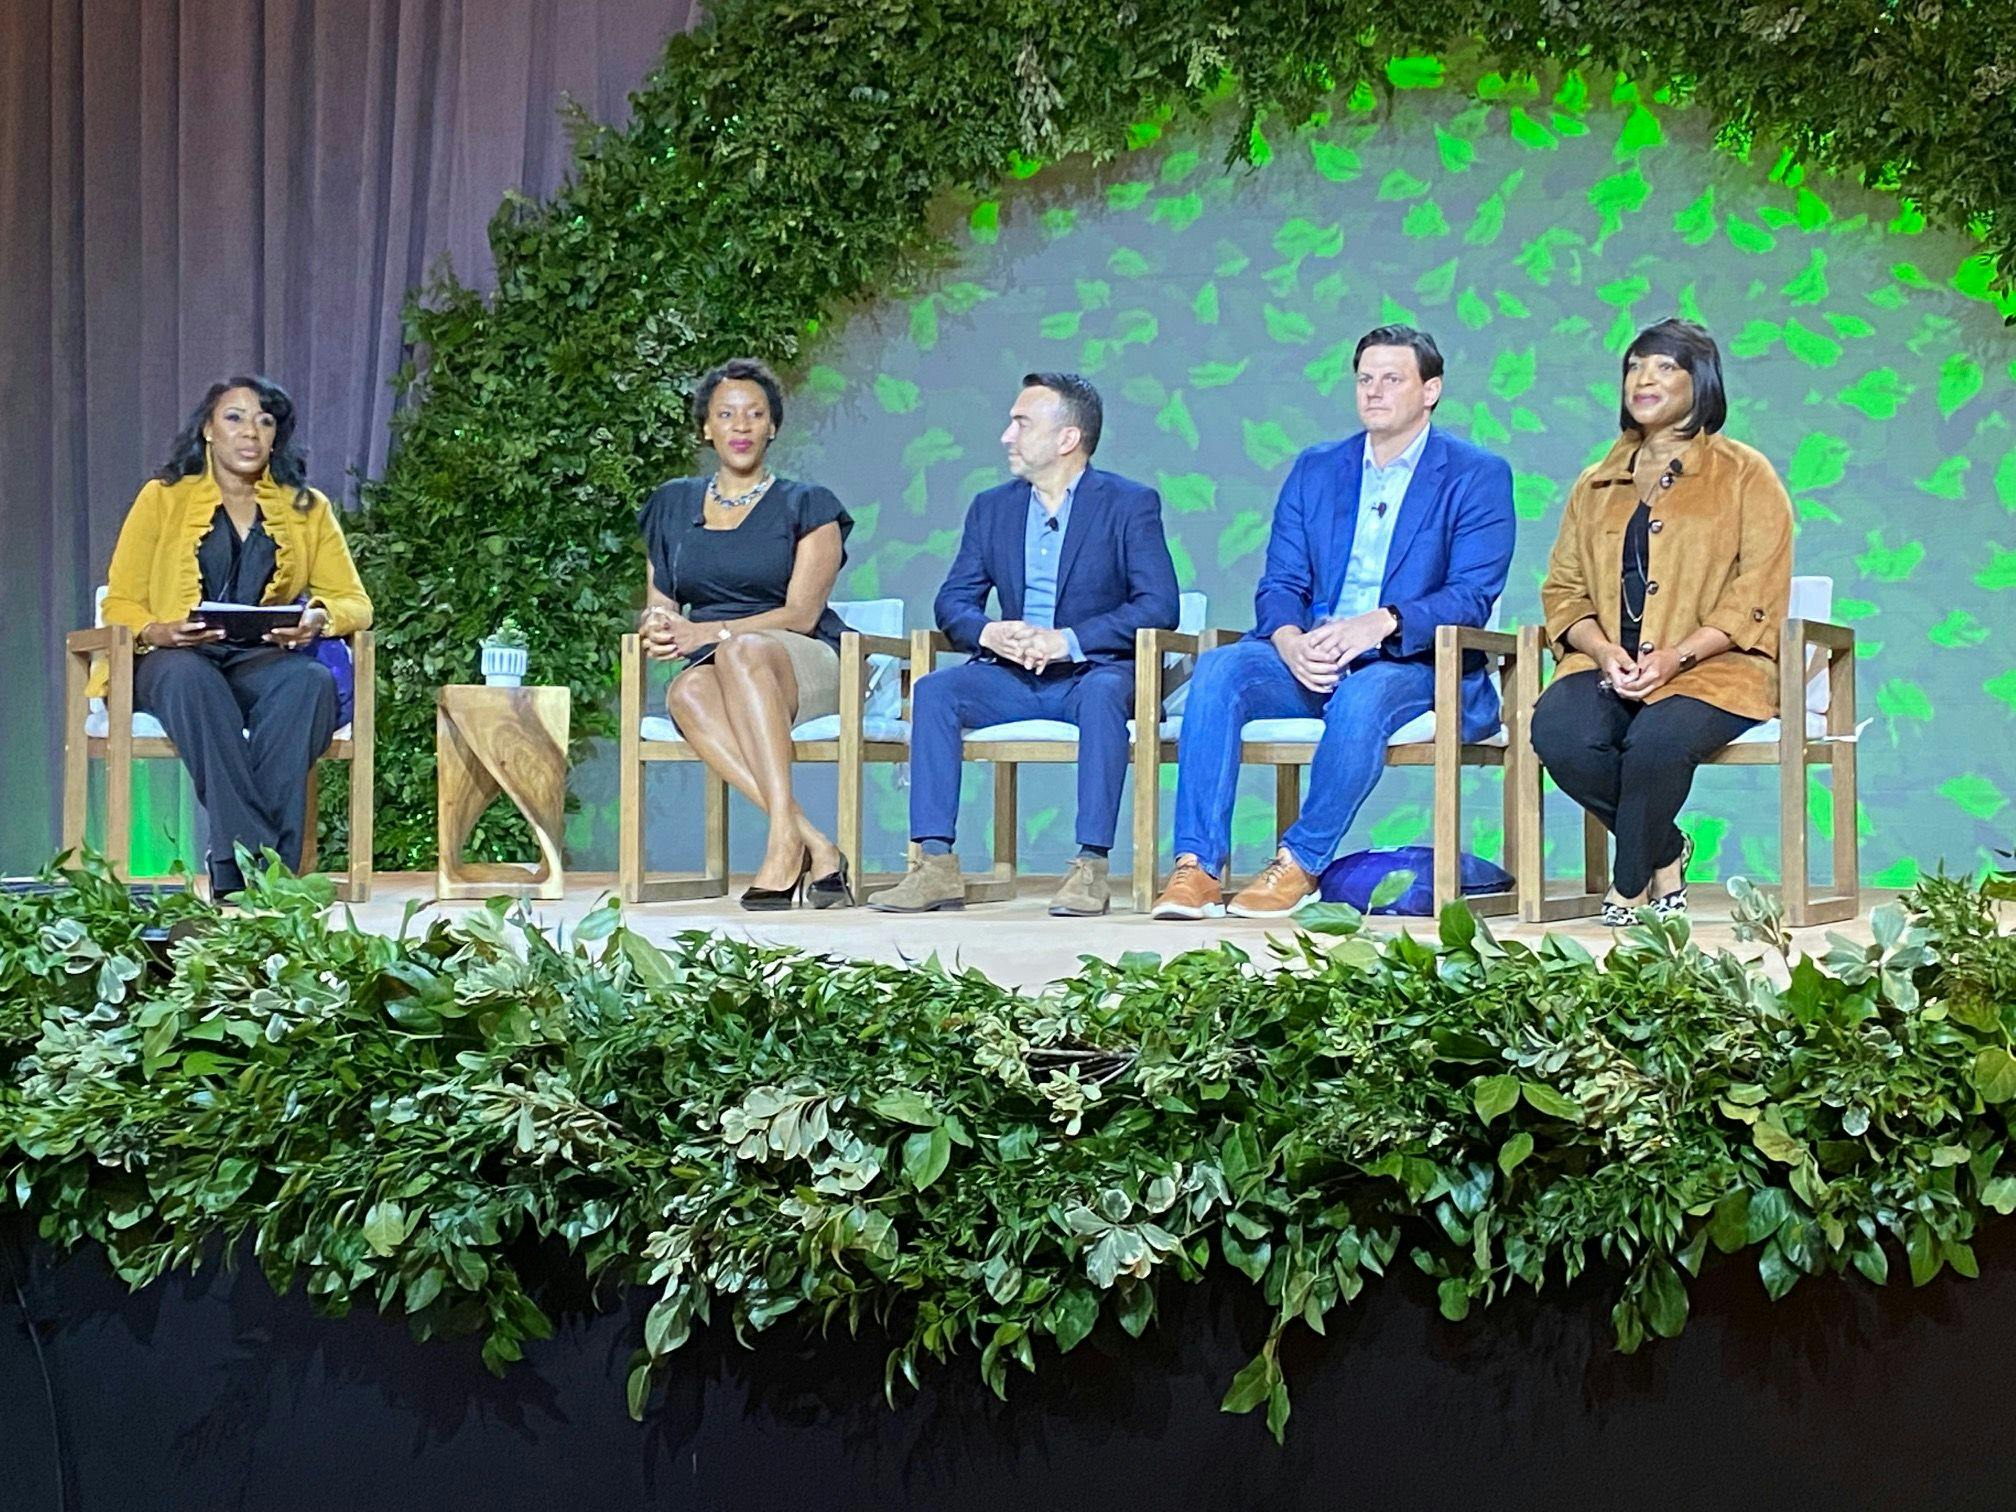 Panelists at the HLTH Conference talked about improving health equity. From left, Eboné Carrington, managing director of Manatt Health; Amaka Eneanya, head of strategy and operations for Fresenius Medical Care; Bechara Choucair, senior vice president and chief health officer of Kaiser Permanente; Taylor Justice, co-founder and president of Unite Us; and Charlotte Owens, vice president and head of health equity and patient affairs at Takeda Pharmaceuticals.